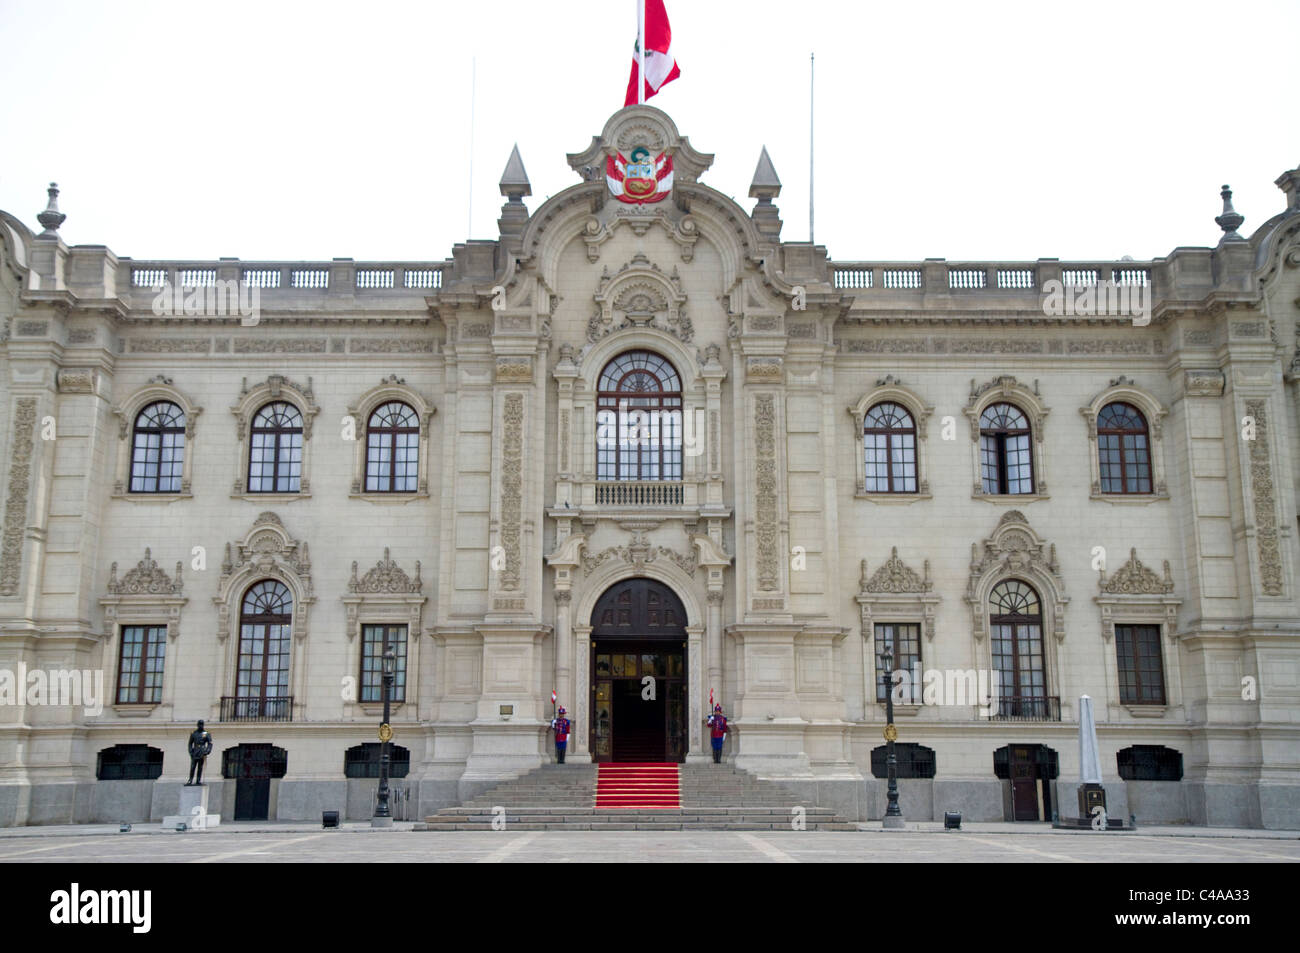 The Government Palace of Peru also known as the House of Pizarro, located on the north side of Plaza Mayor in Lima, Peru. Stock Photo